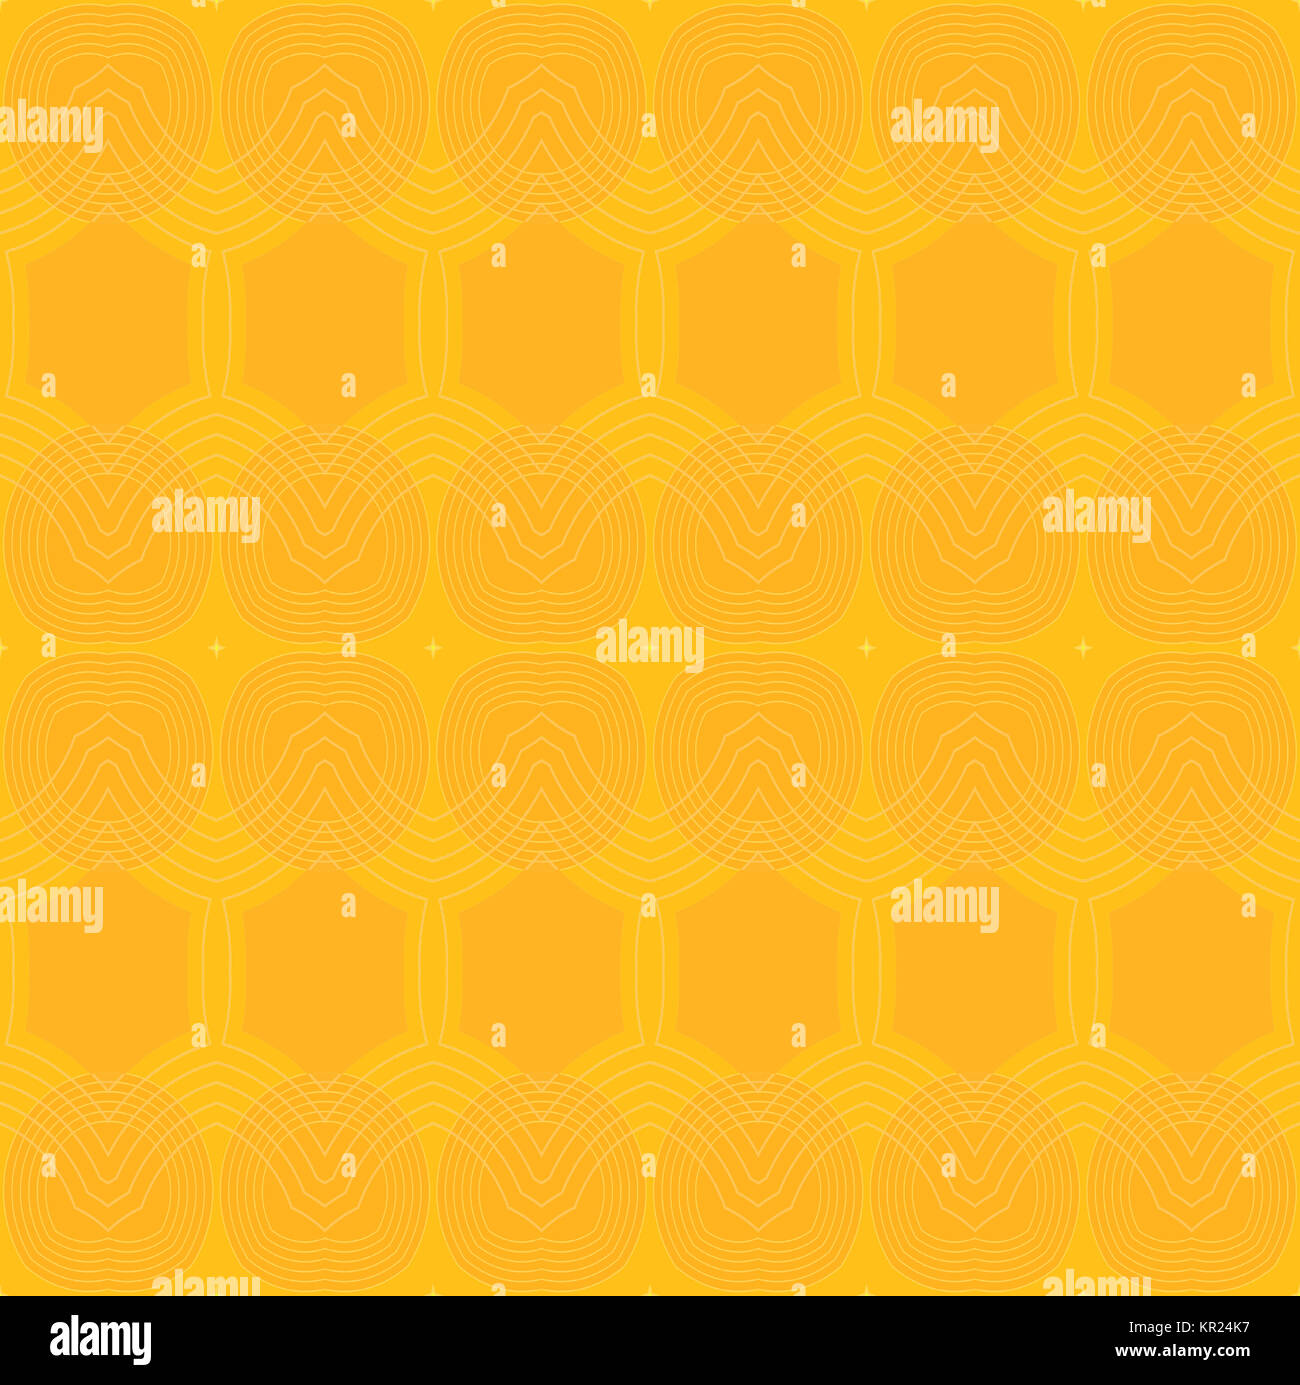 Abstract geometric plain background.  Seamless ellipses and hexagon pattern in bright yellow and orange with outlines. Stock Photo